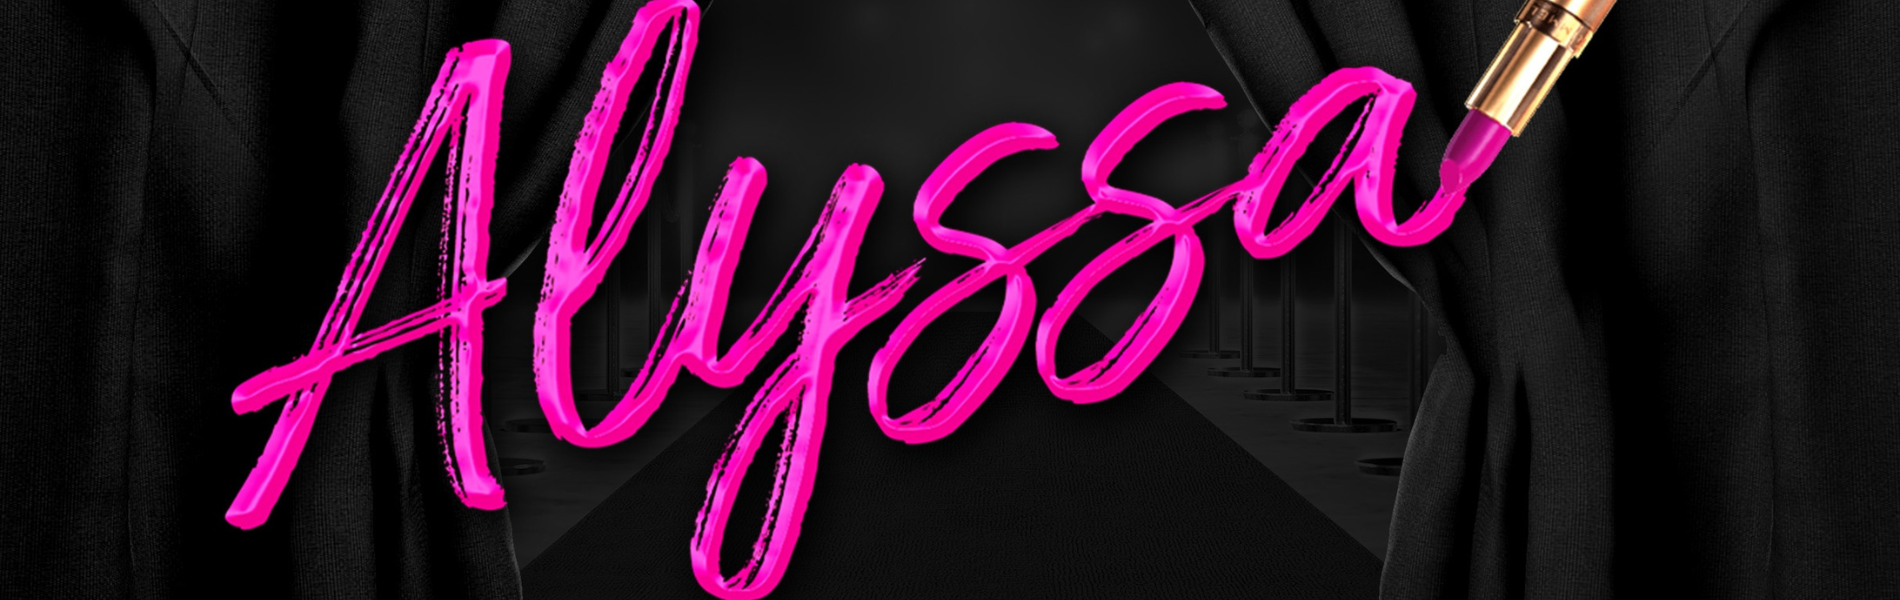 The name Alyssa written in bright pink lipstick on a black cloth background